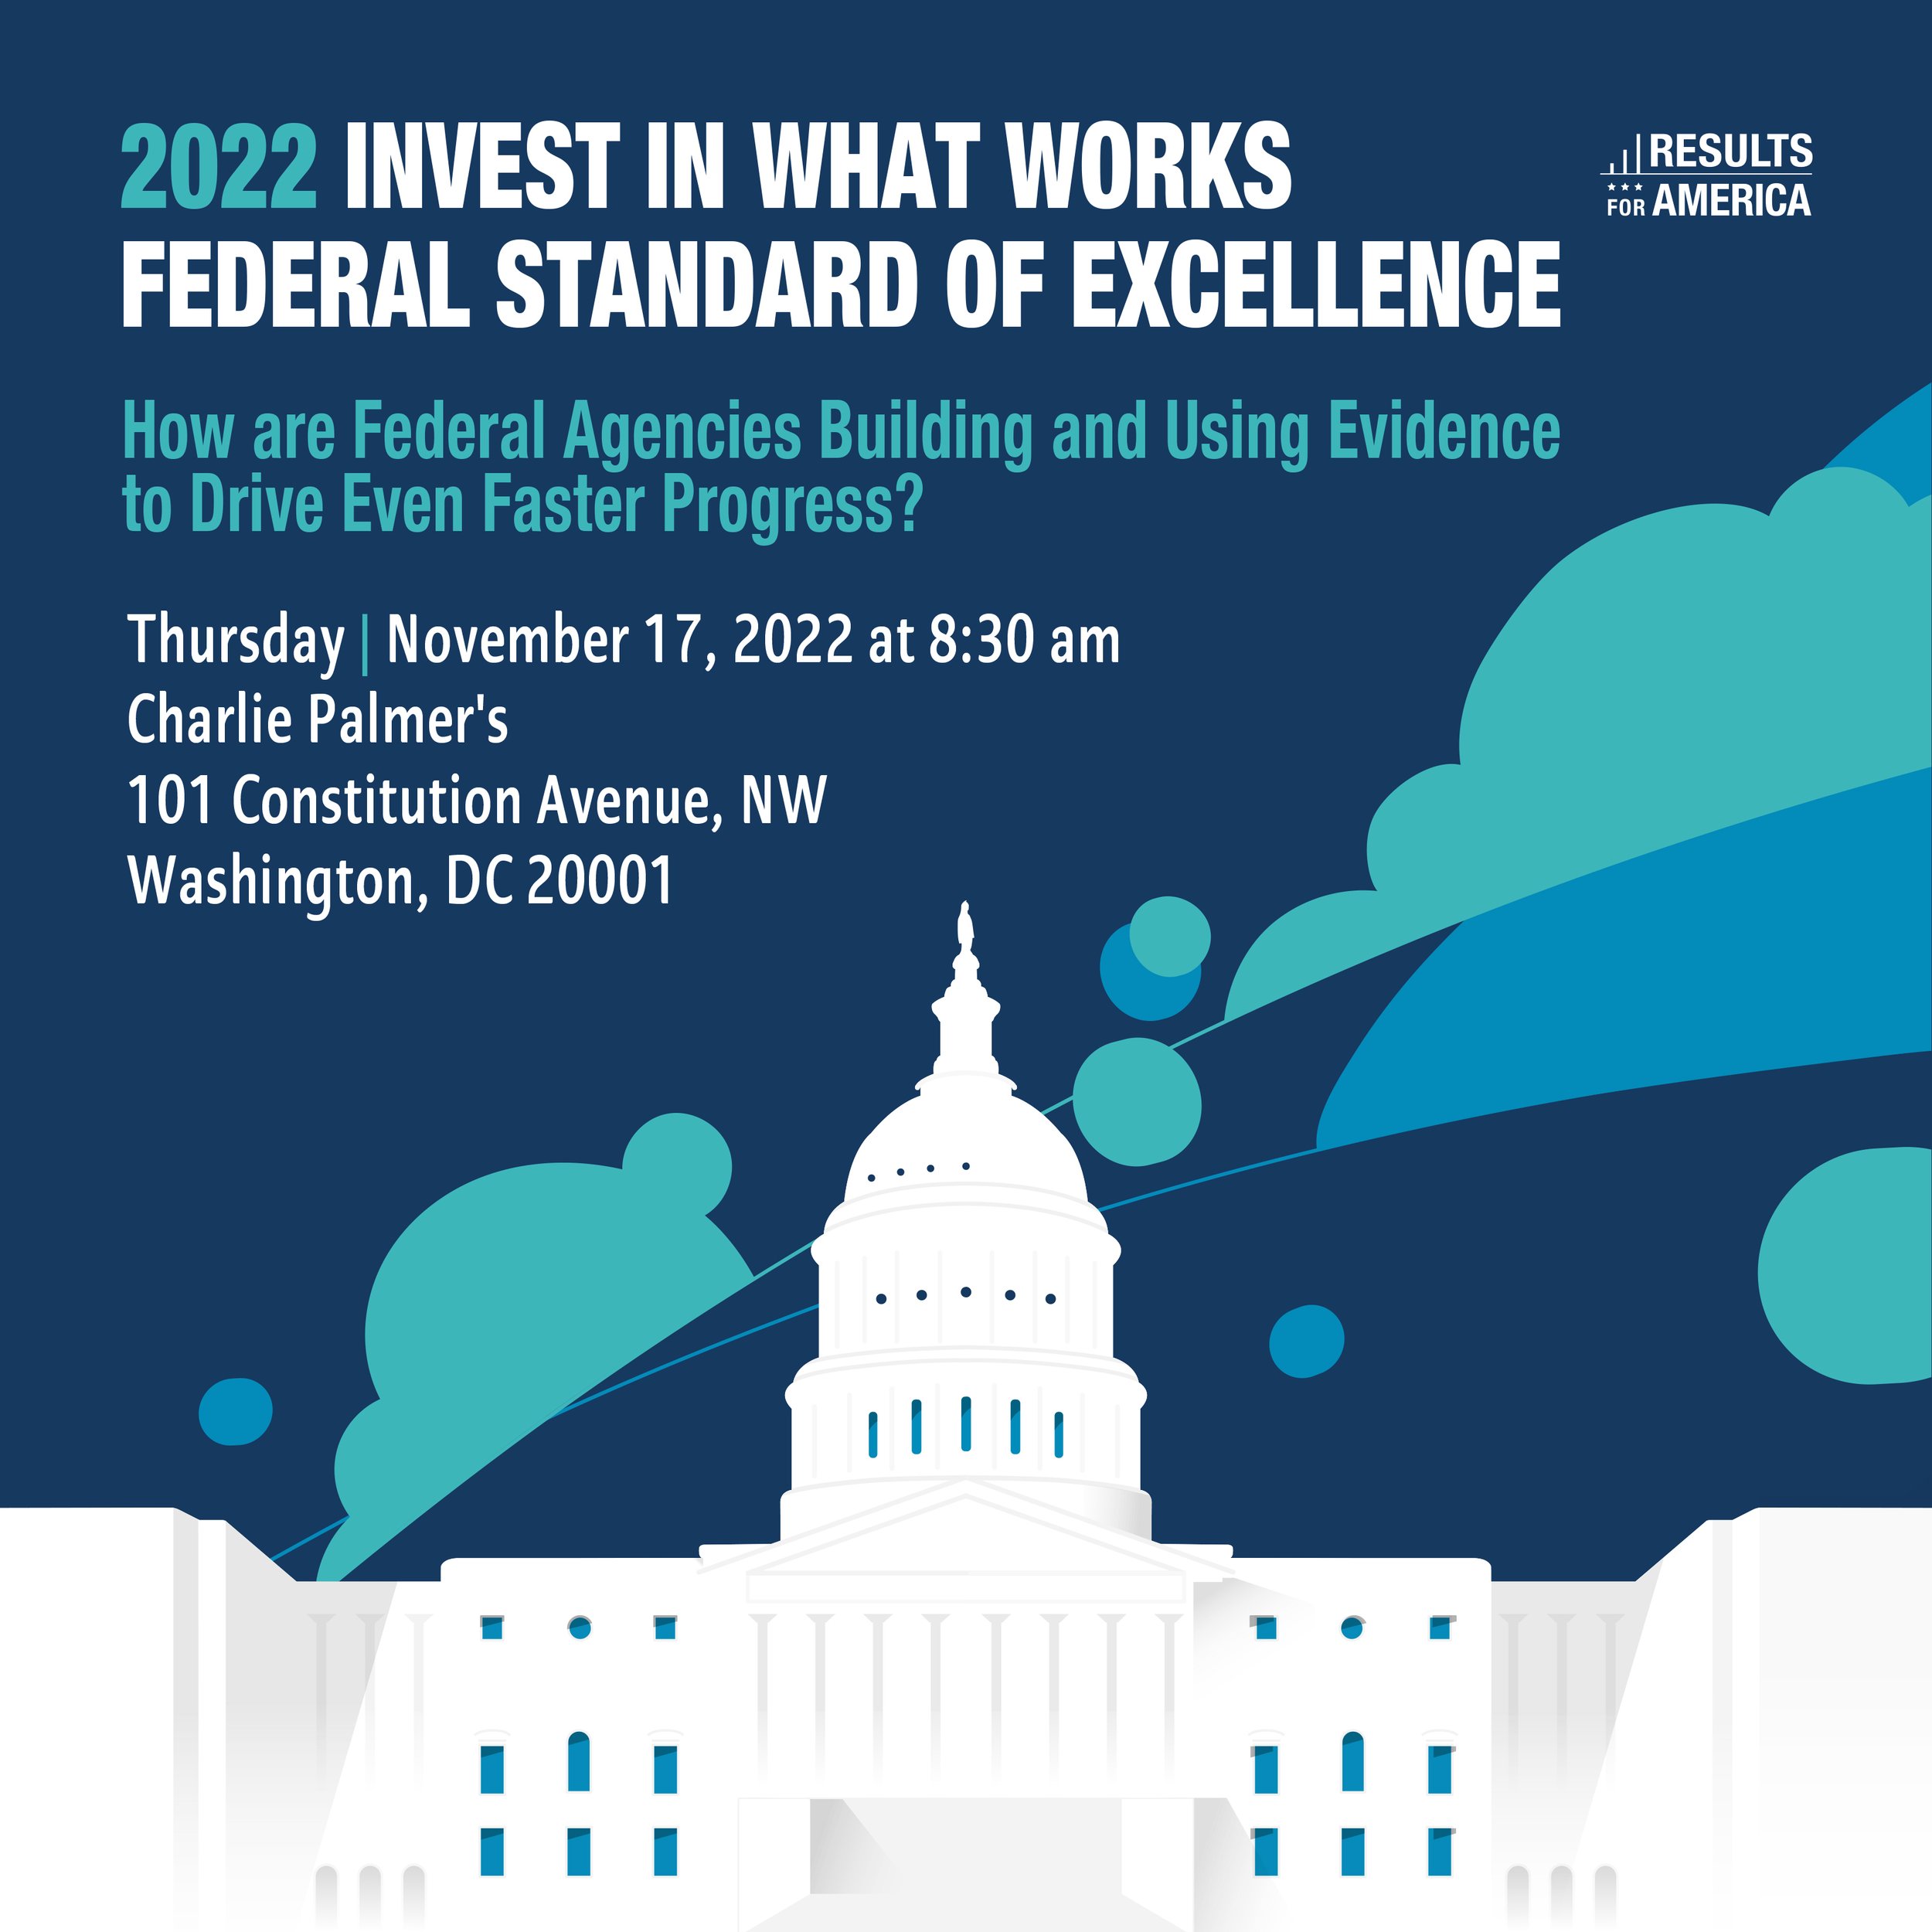 2022 Invest in What Works Federal Standard of Excellence